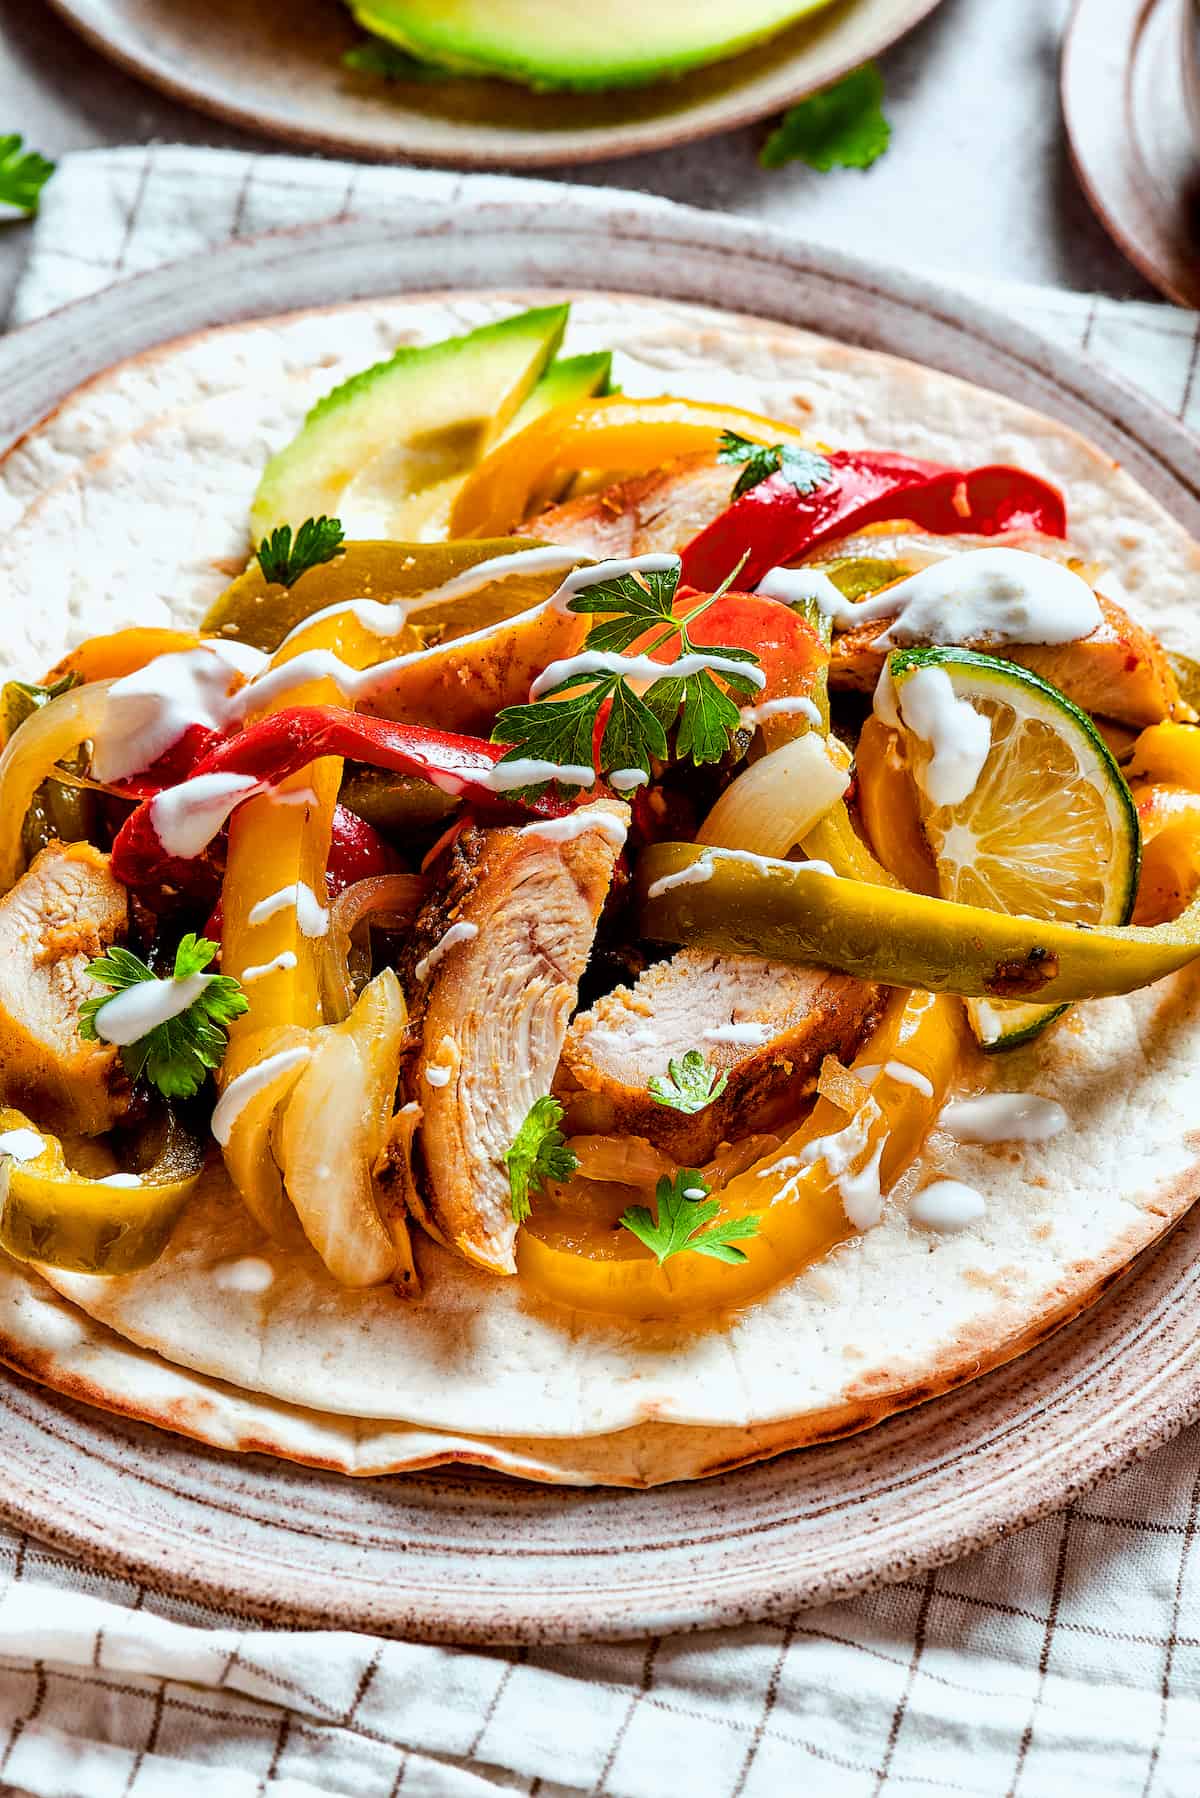 Homemade chicken fajitas with vegetables and lime slices.